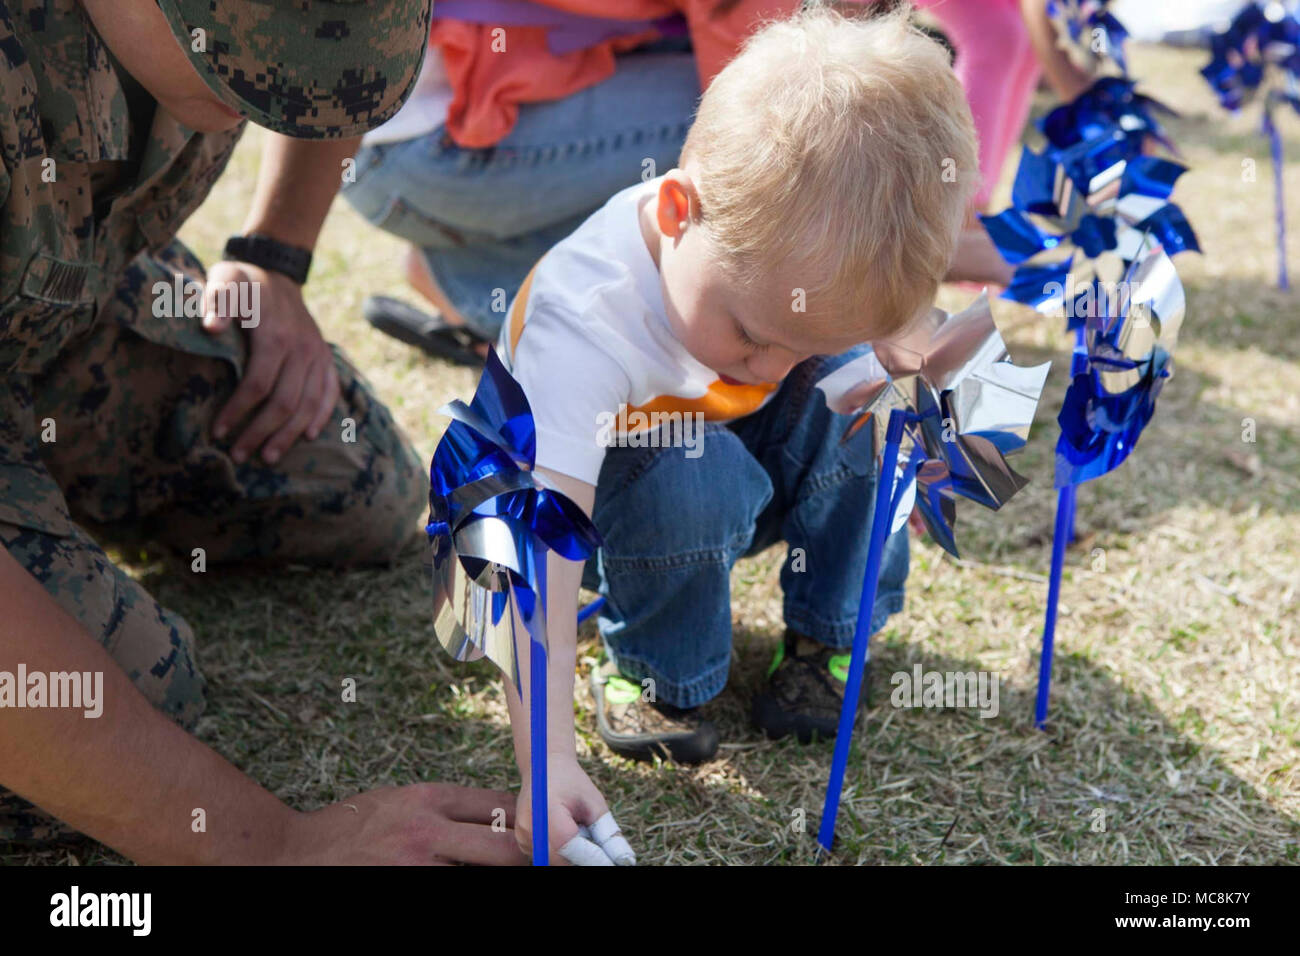 U.S. Marine Corps Lance Cpl. Andre Vianna, motor vehicle operator with Marine Wing Support Squadron (MWSS) 171, helps a child plant blue pinwheels during the 2018 National Child Abuse Prevention Pinwheel Planting at Marine Corps Air Station, Iwakuni, Japan, March 29, 2018. The blue pinwheels were planted as a part of the National Child Abuse Prevention Month activities and provide the opportunity for individuals and organizations to take action. Stock Photo